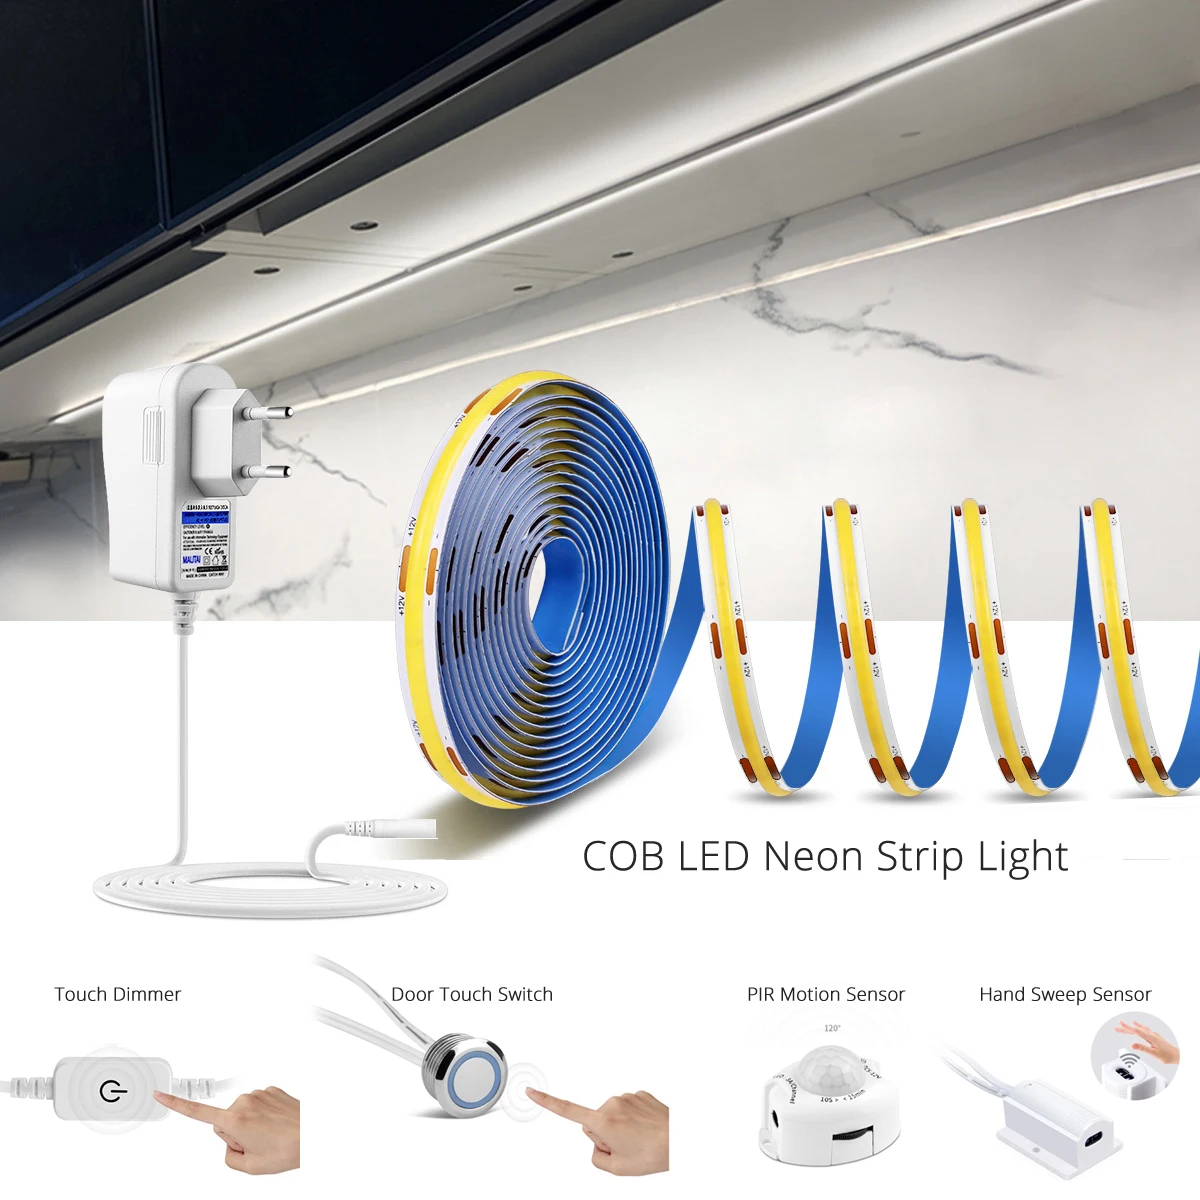 COB Led Strip Tape Light 12V 320 leds/m Width 8mm with Adapter Cabinet Door Touch Dimmer Hand Sweep PIR Motion Sensor Switch